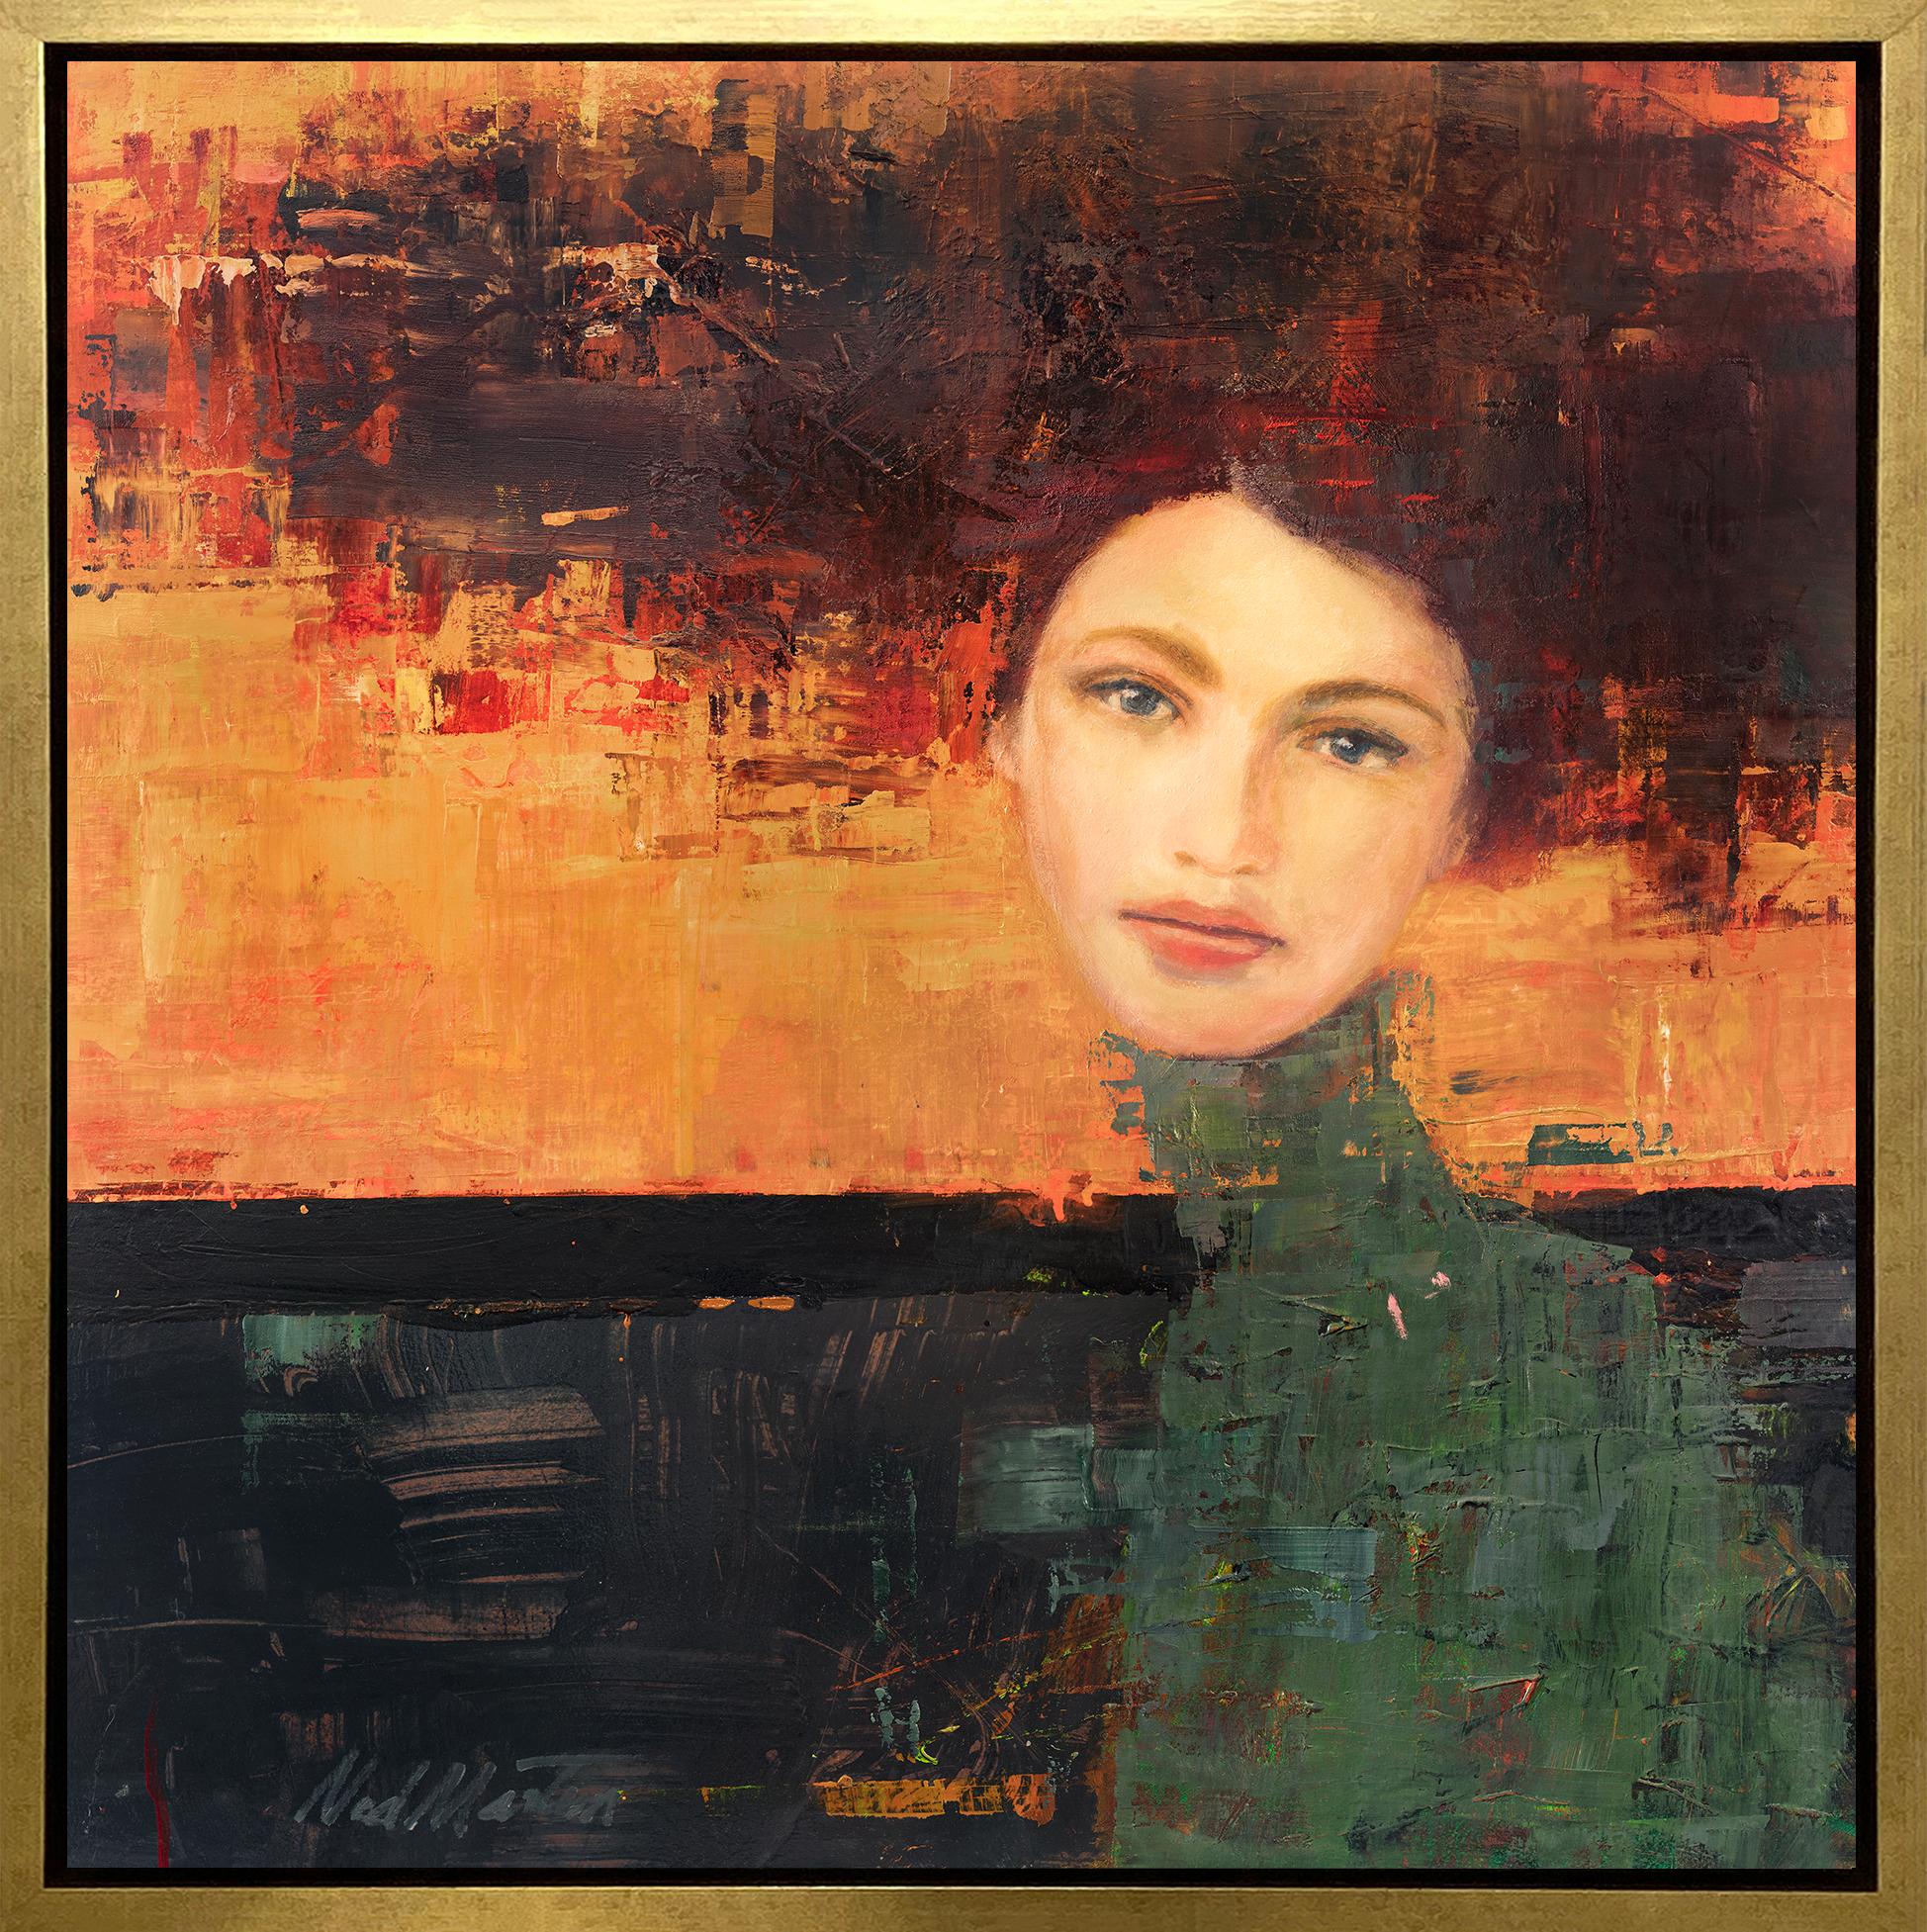 Ned Martin Portrait Print - "Spirits Through Time XI, " Framed Limited Edition Giclee Print, 36" x 36"